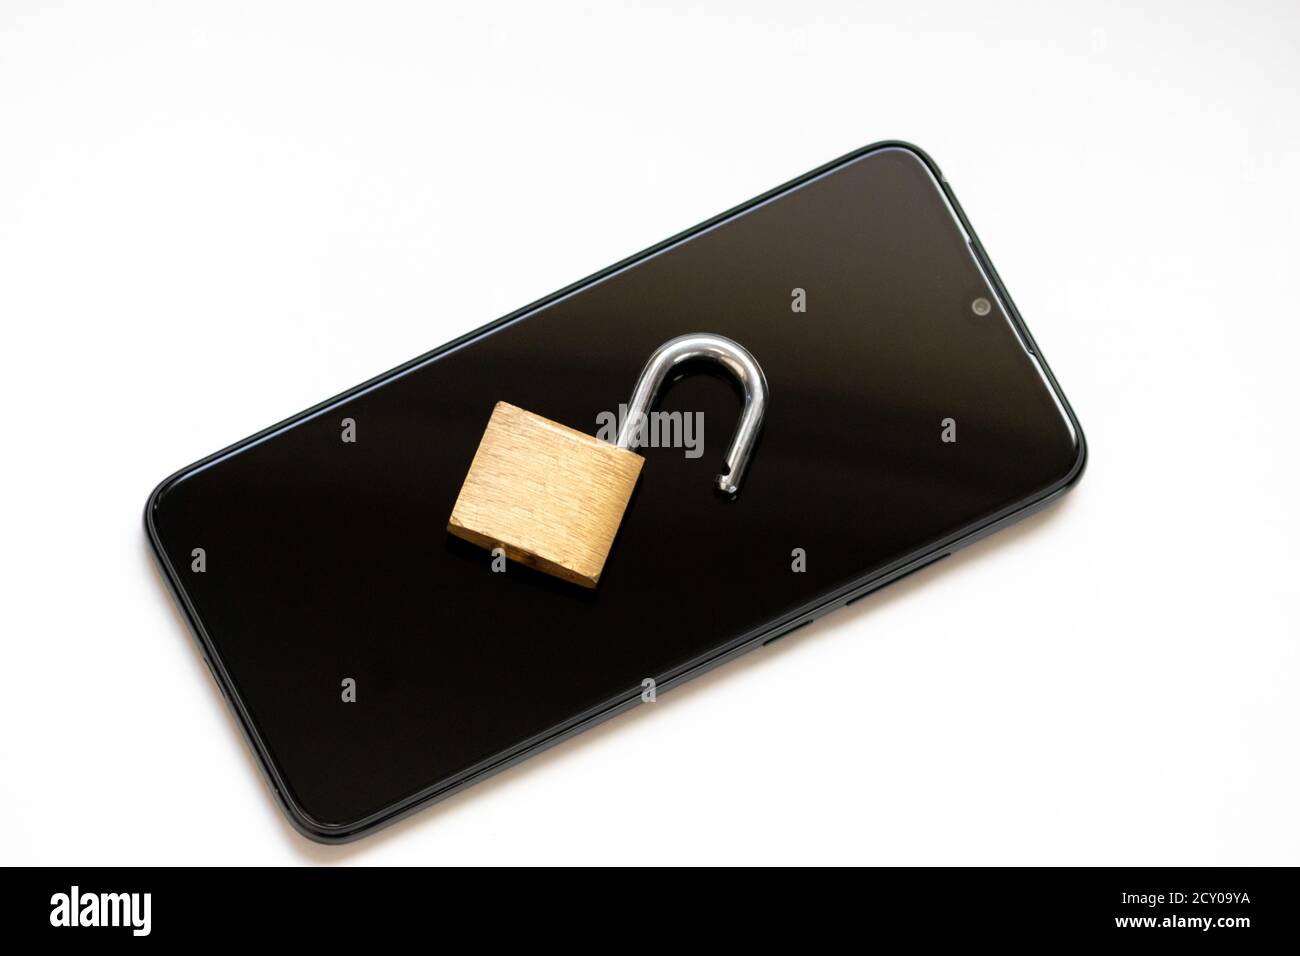 Vulnerable encryption and cyber security shows an open key lock on a black smartphone for hacker attack or cyber attack protection as safety business Stock Photo